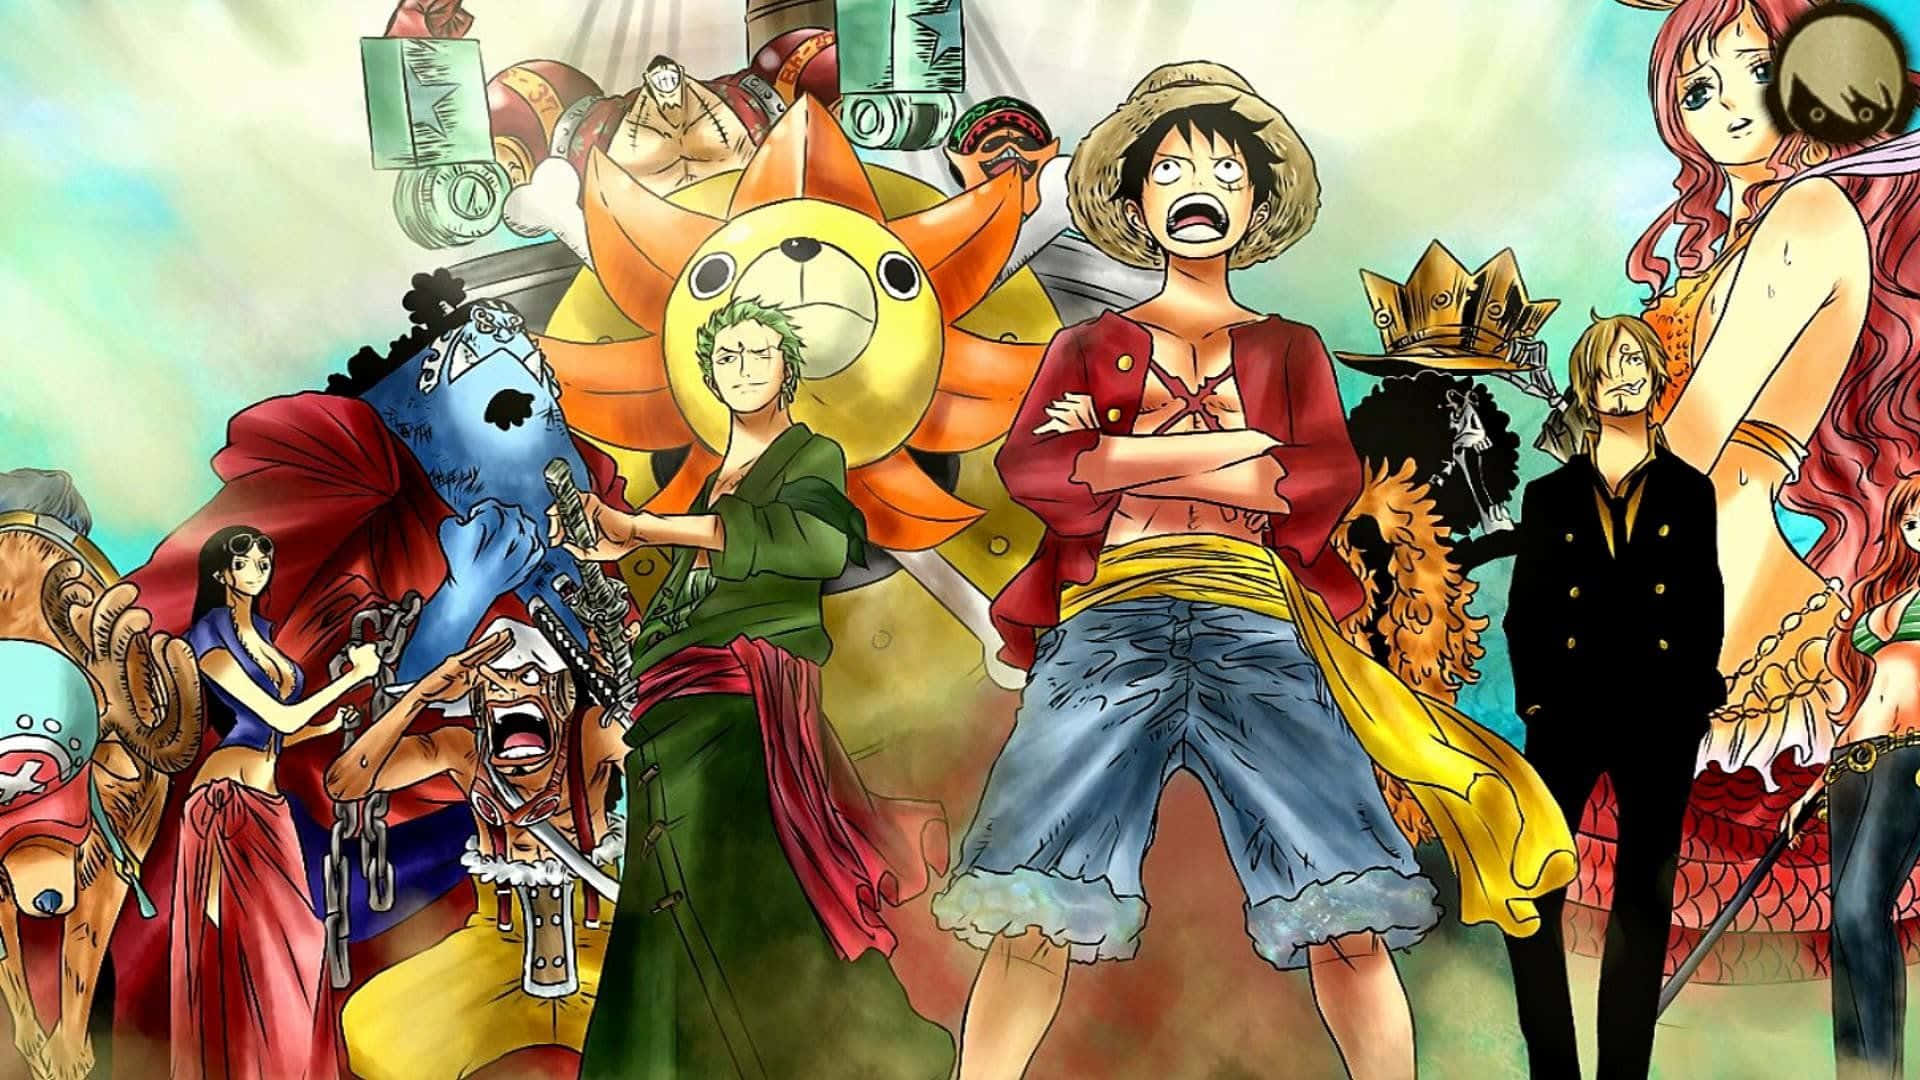 Join the Strawhat Pirates on their next journey! Wallpaper